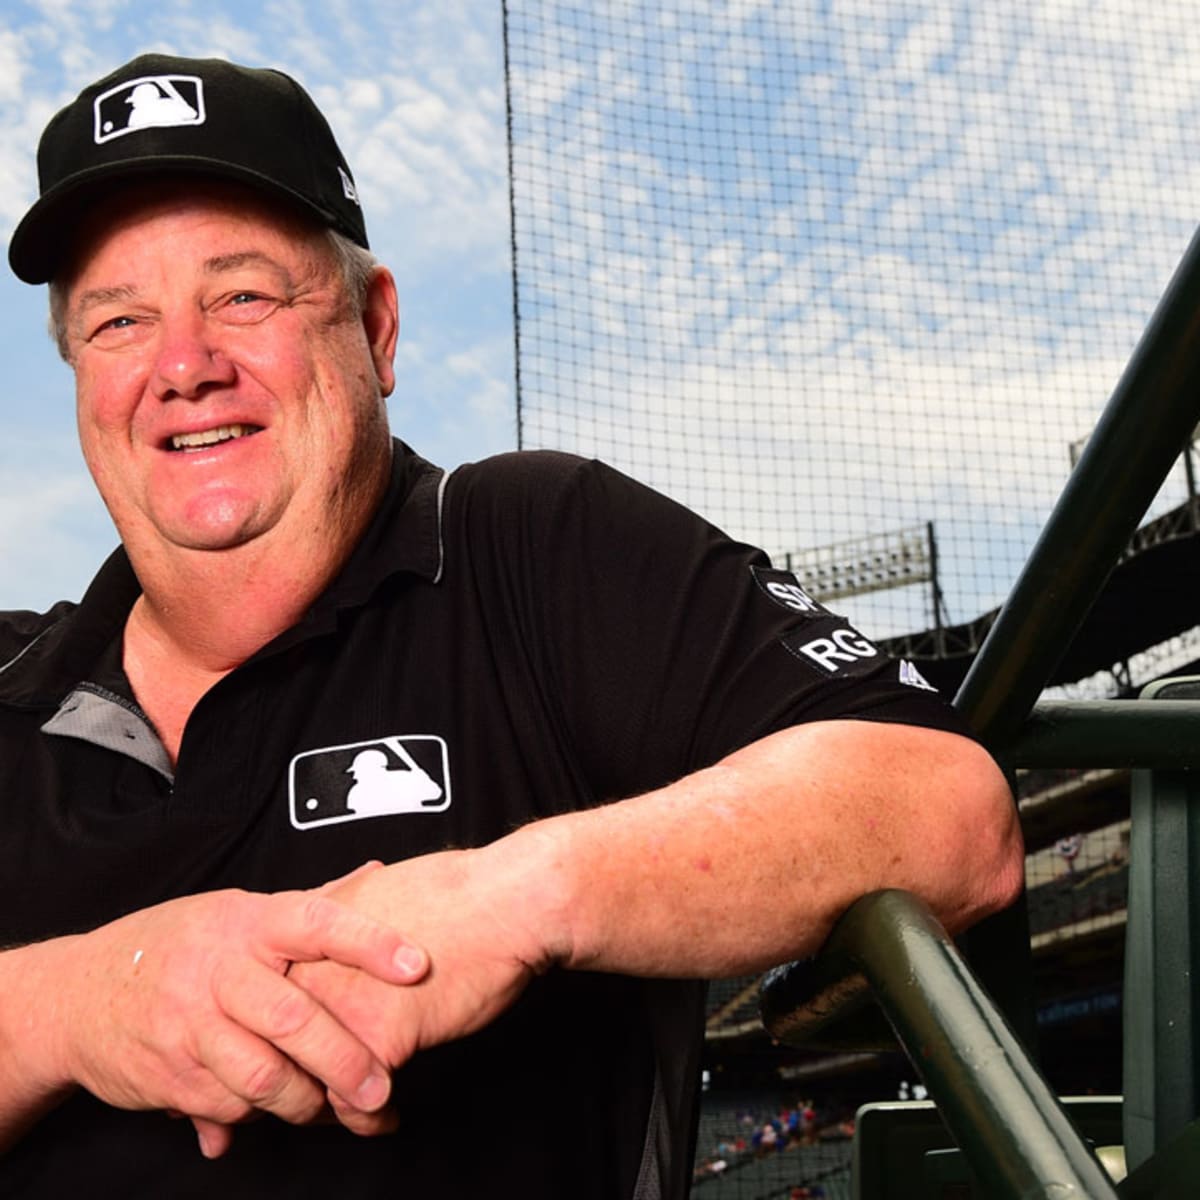 Joe West Breaks Record for Games Umpired - The New York Times